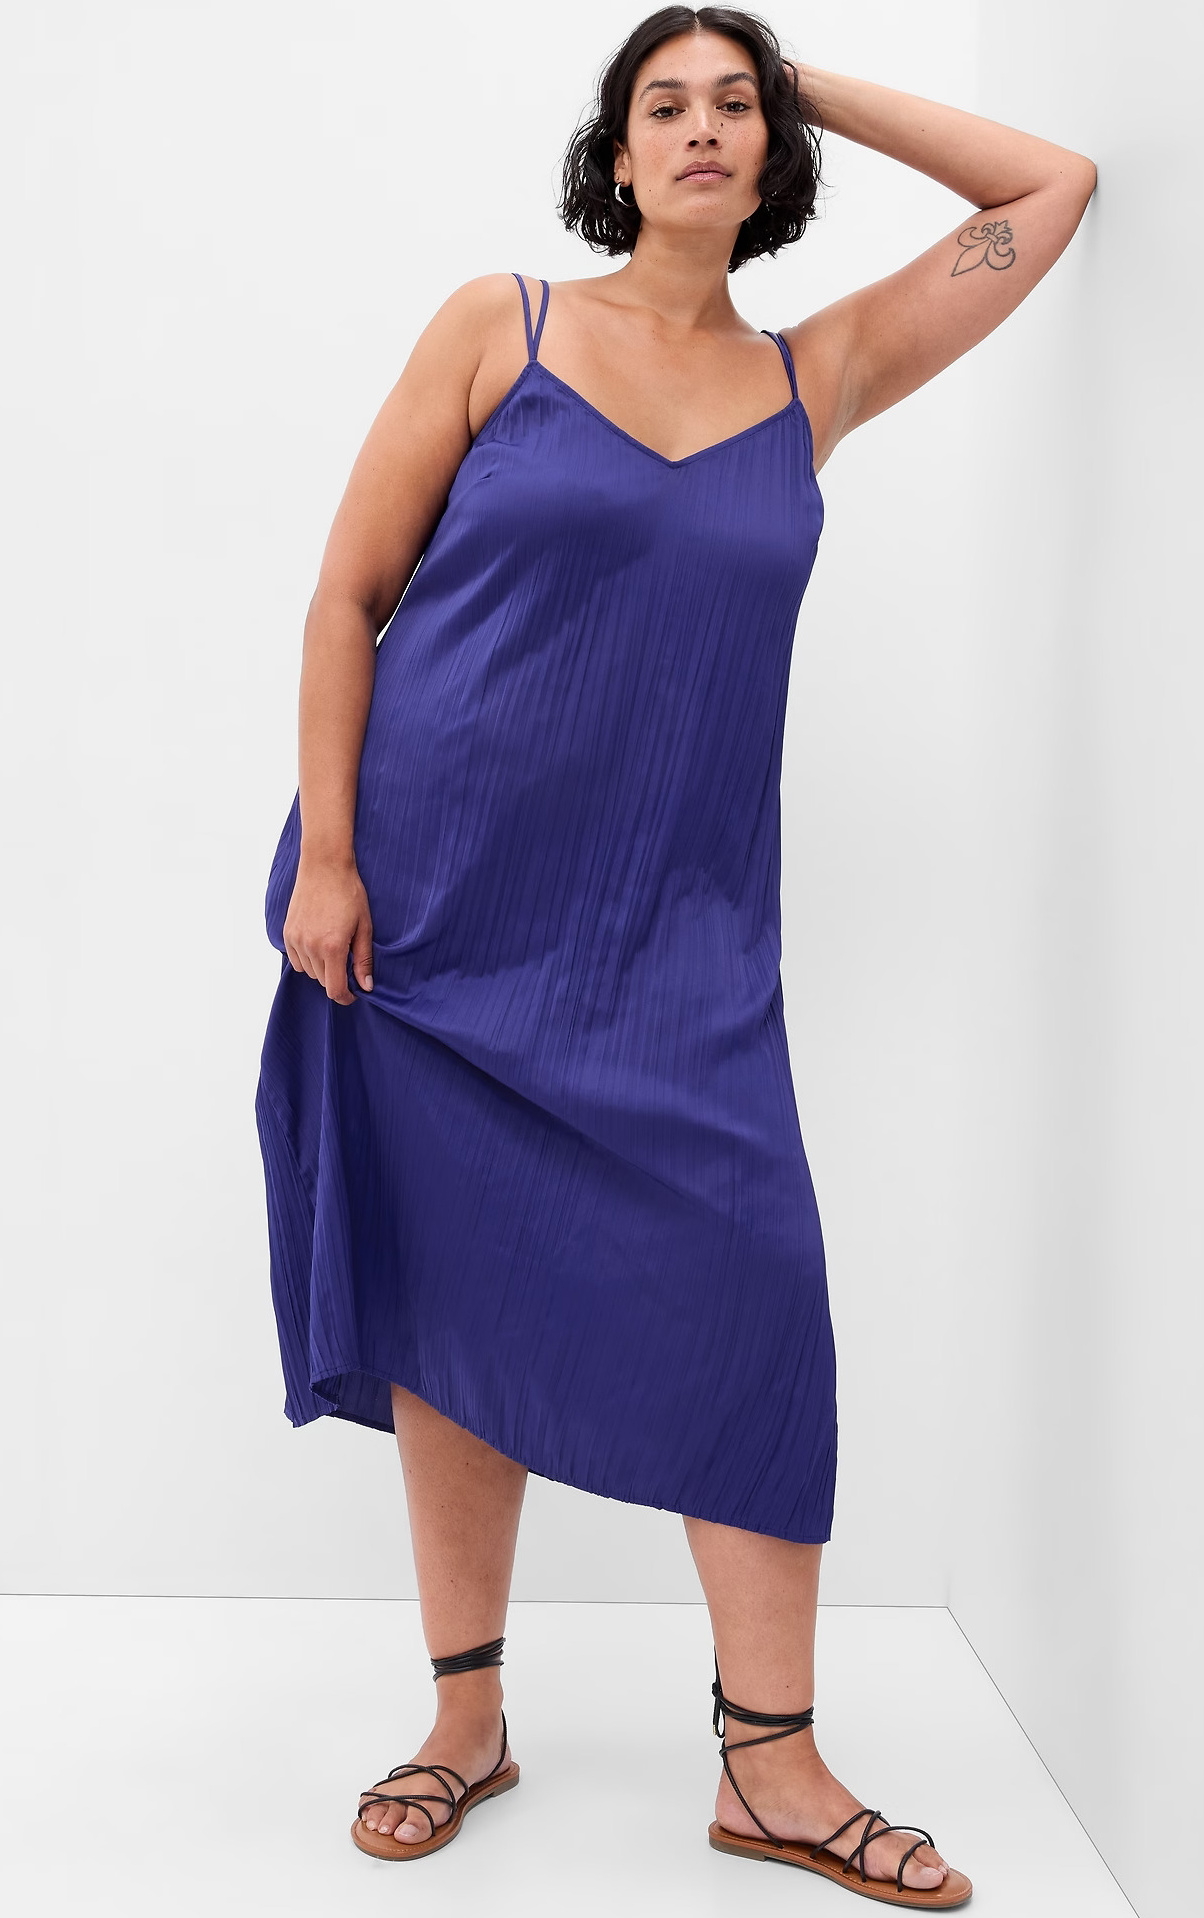 11 Best Slip Dresses for Women: Lightweight and Airy for Travel